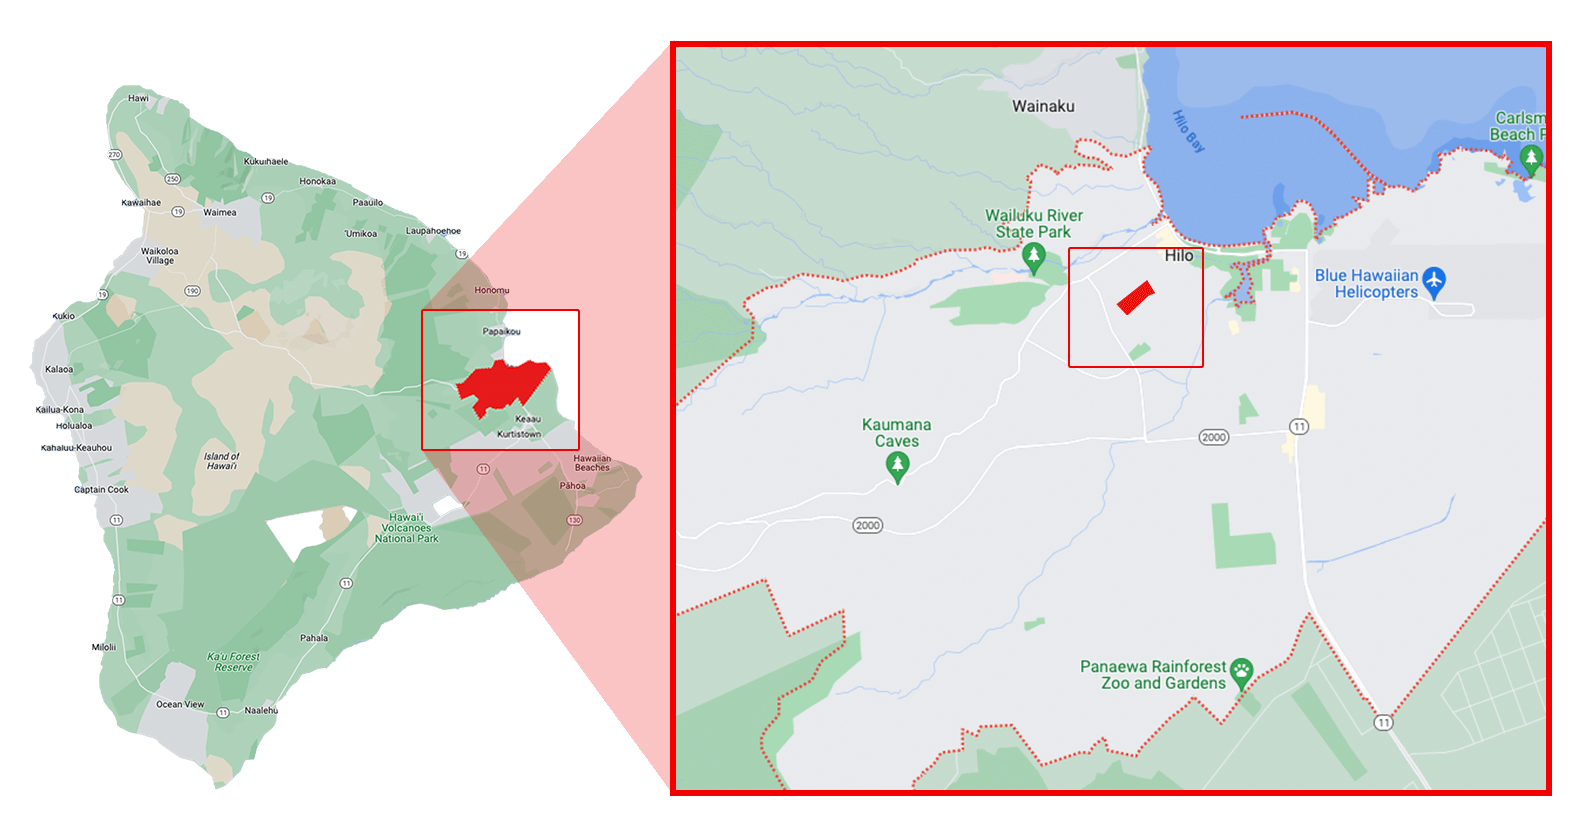 A map of Hawaii Island with an area of detail around the city of Hilo outlined in a red square. From this area of detail around Hilo, an enlarged map of the Hilo area is shown with another area of detail outlined within that which shows the area where the Hale Pueo campus planned build site is located. This area is shown as a small solid red rectangle located about half a mile south west of Hilo Bay.